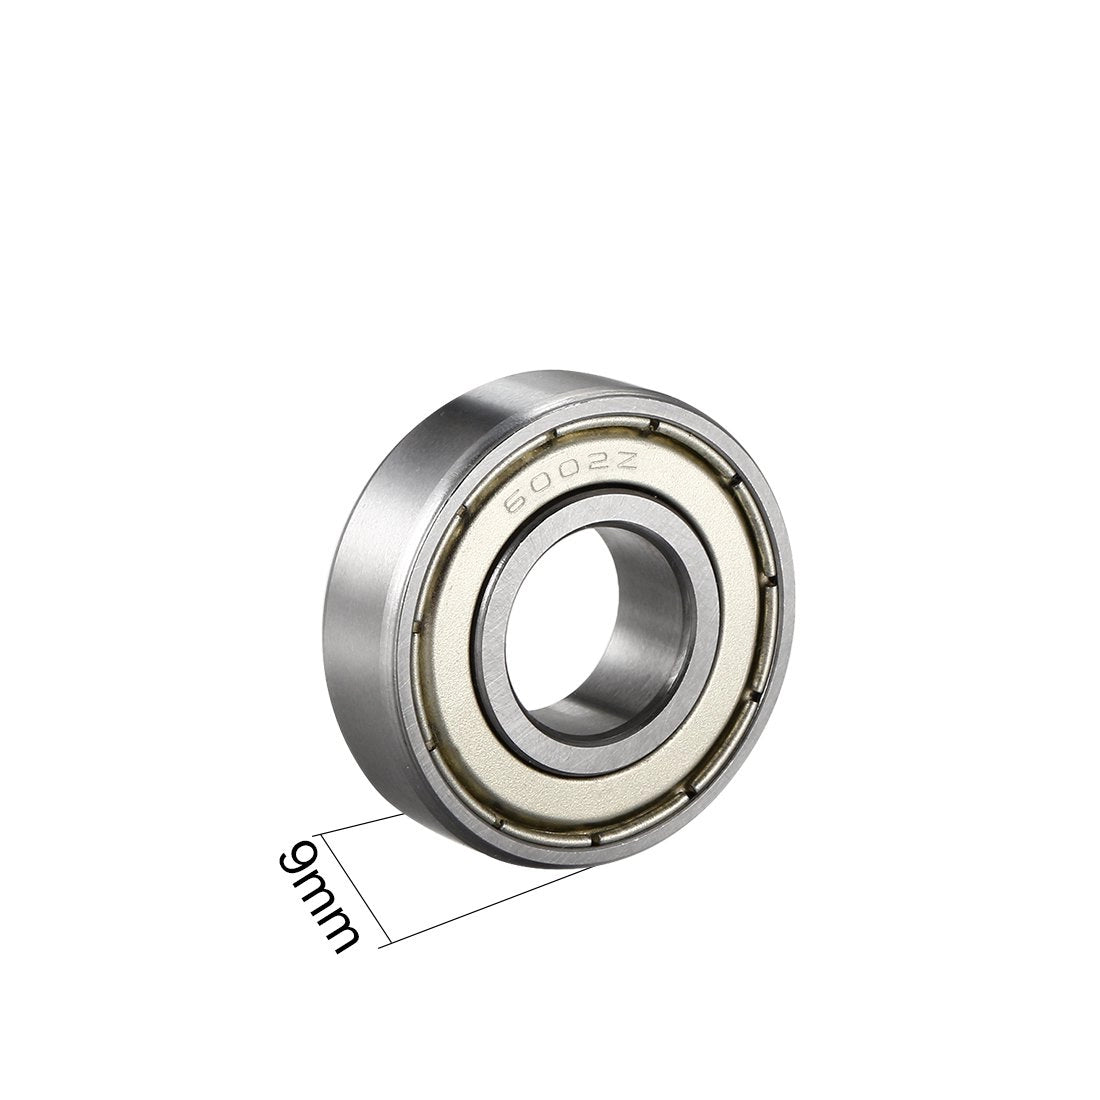 uxcell 6002Z Deep Groove Ball Bearing Single Shield 160102, 15mm x 32mm x 9mm Chrome Steel Bearings (Pack of 5)-4